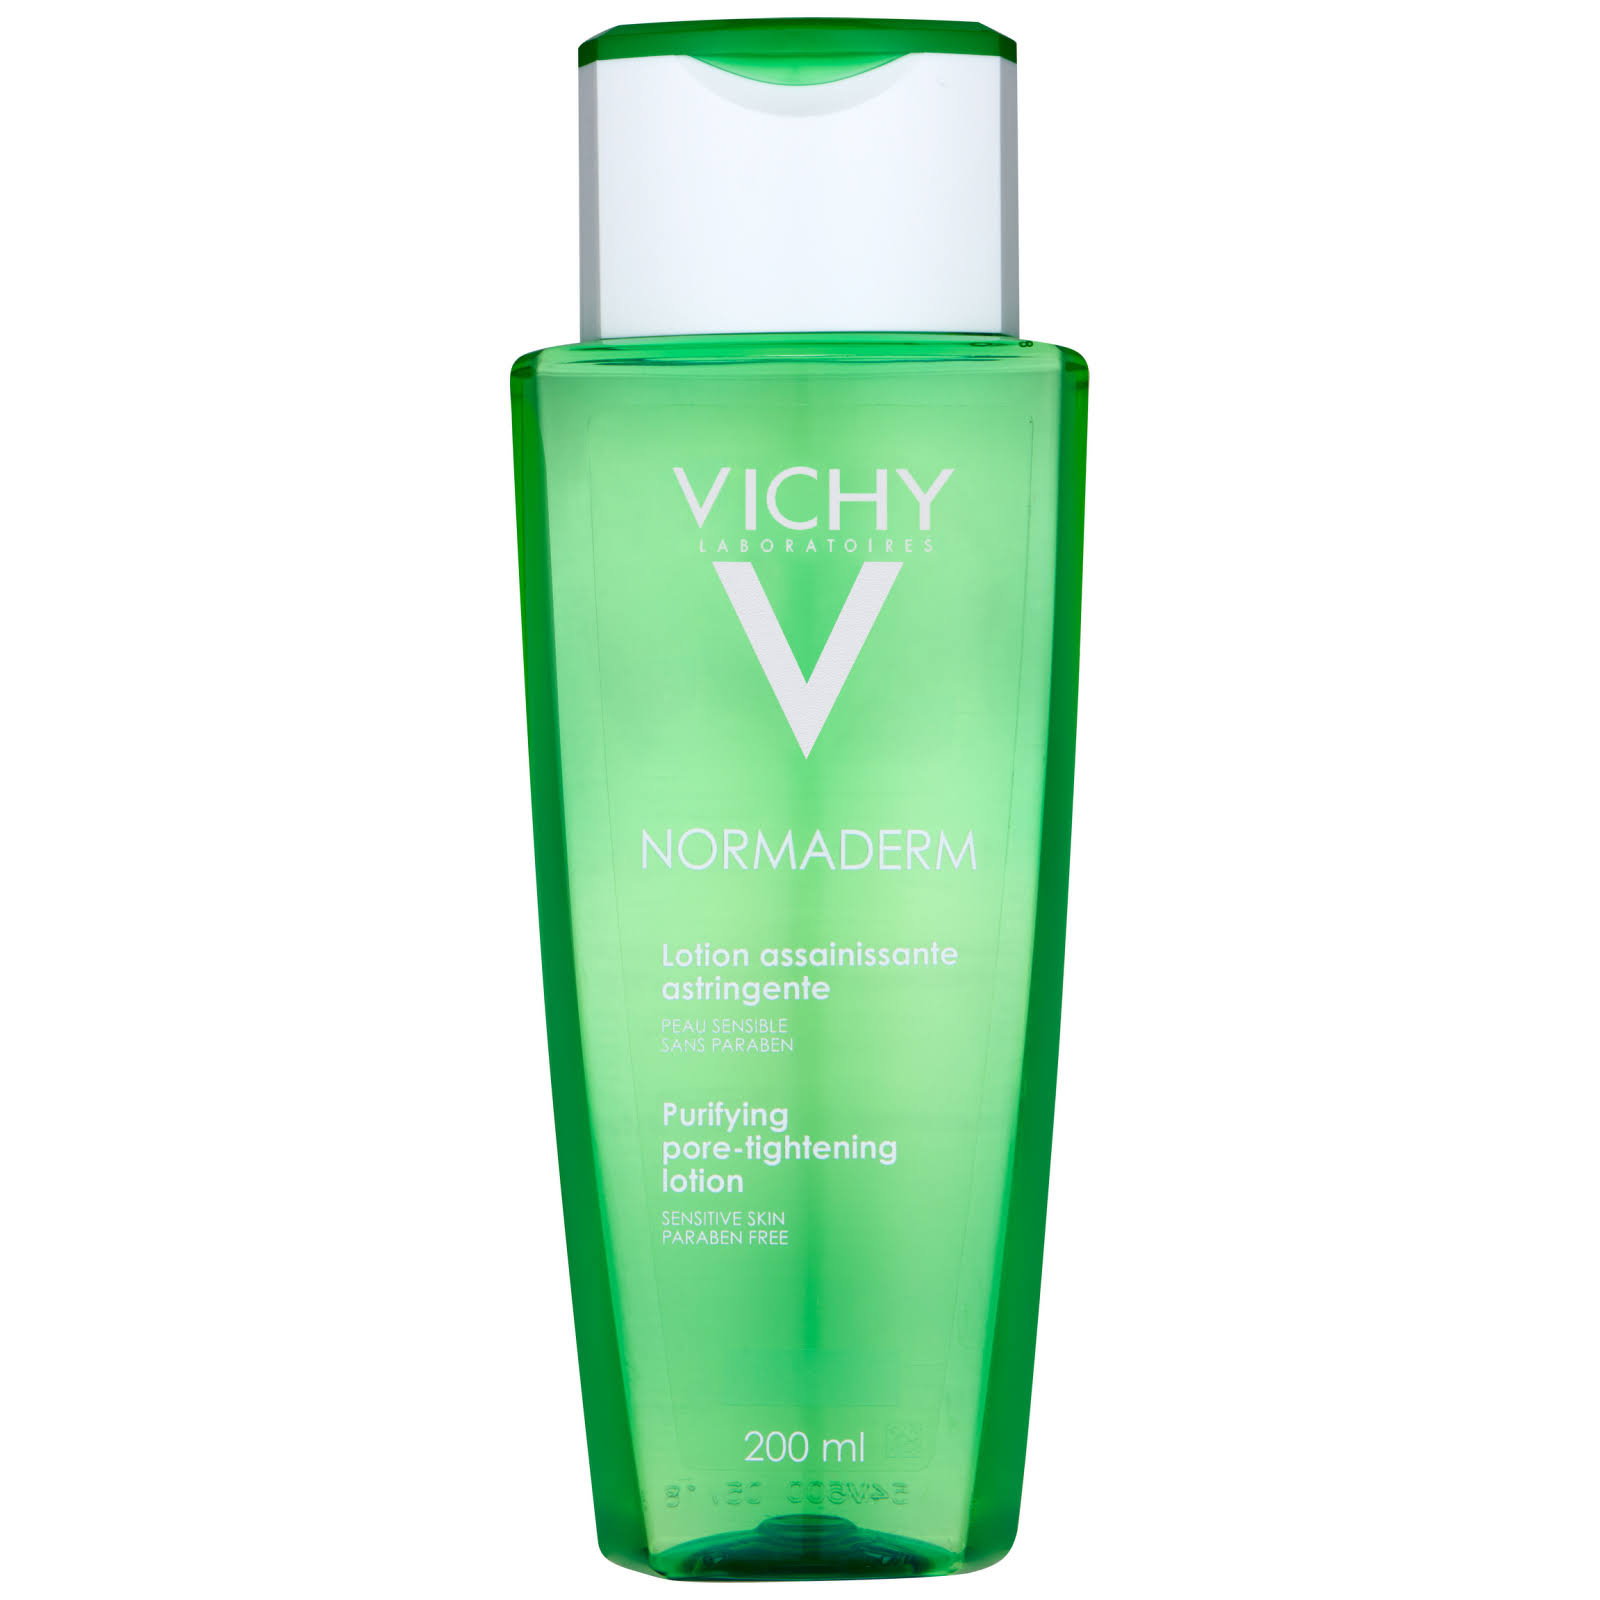 Vichy Normaderm Purifying Pore-Lightening Lotion - Sensitive Skin, 200ml